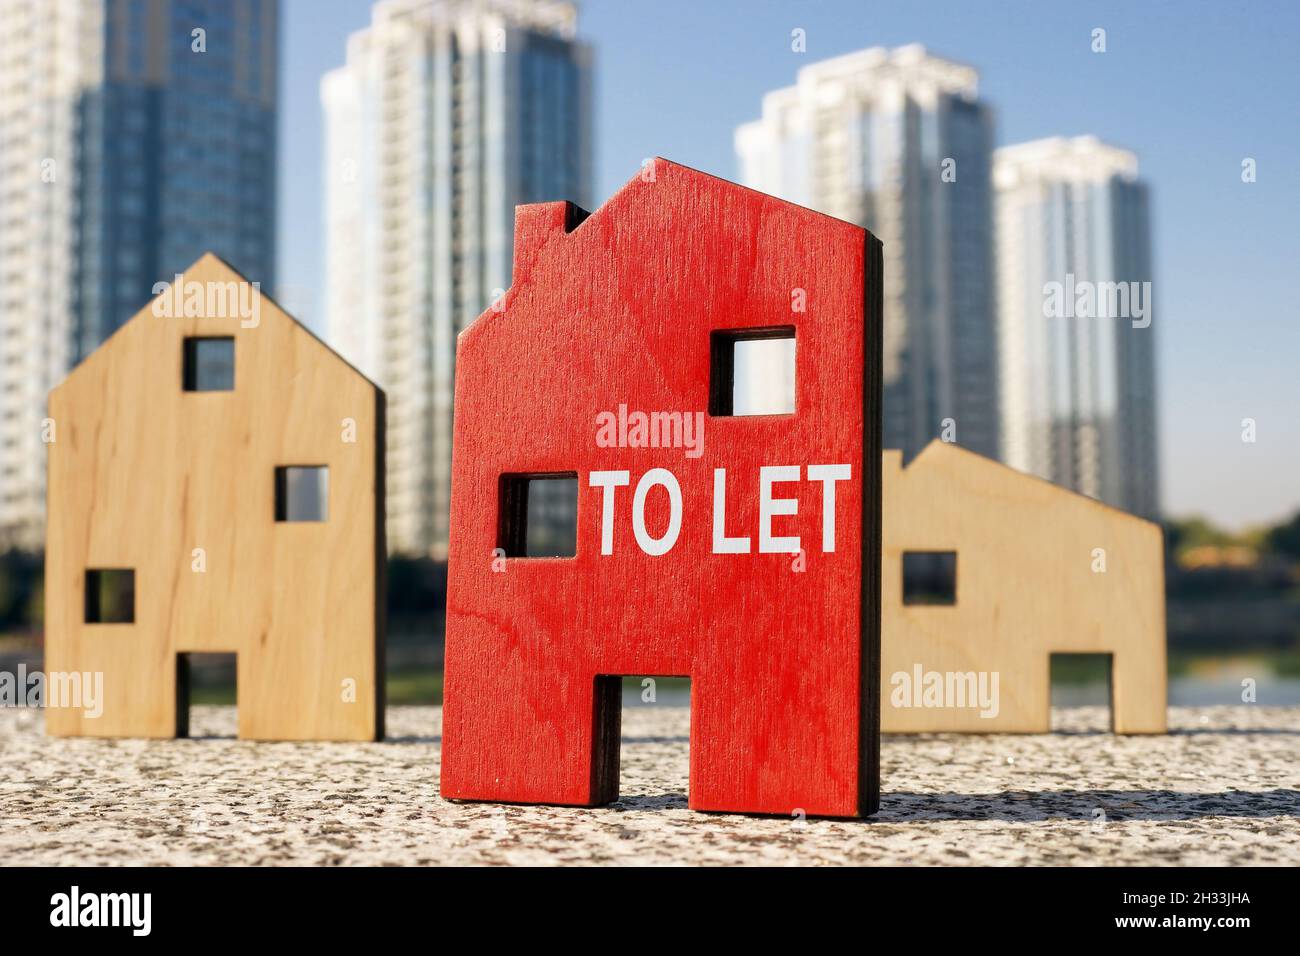 Buy to let concept. Small wooden houses. Stock Photo